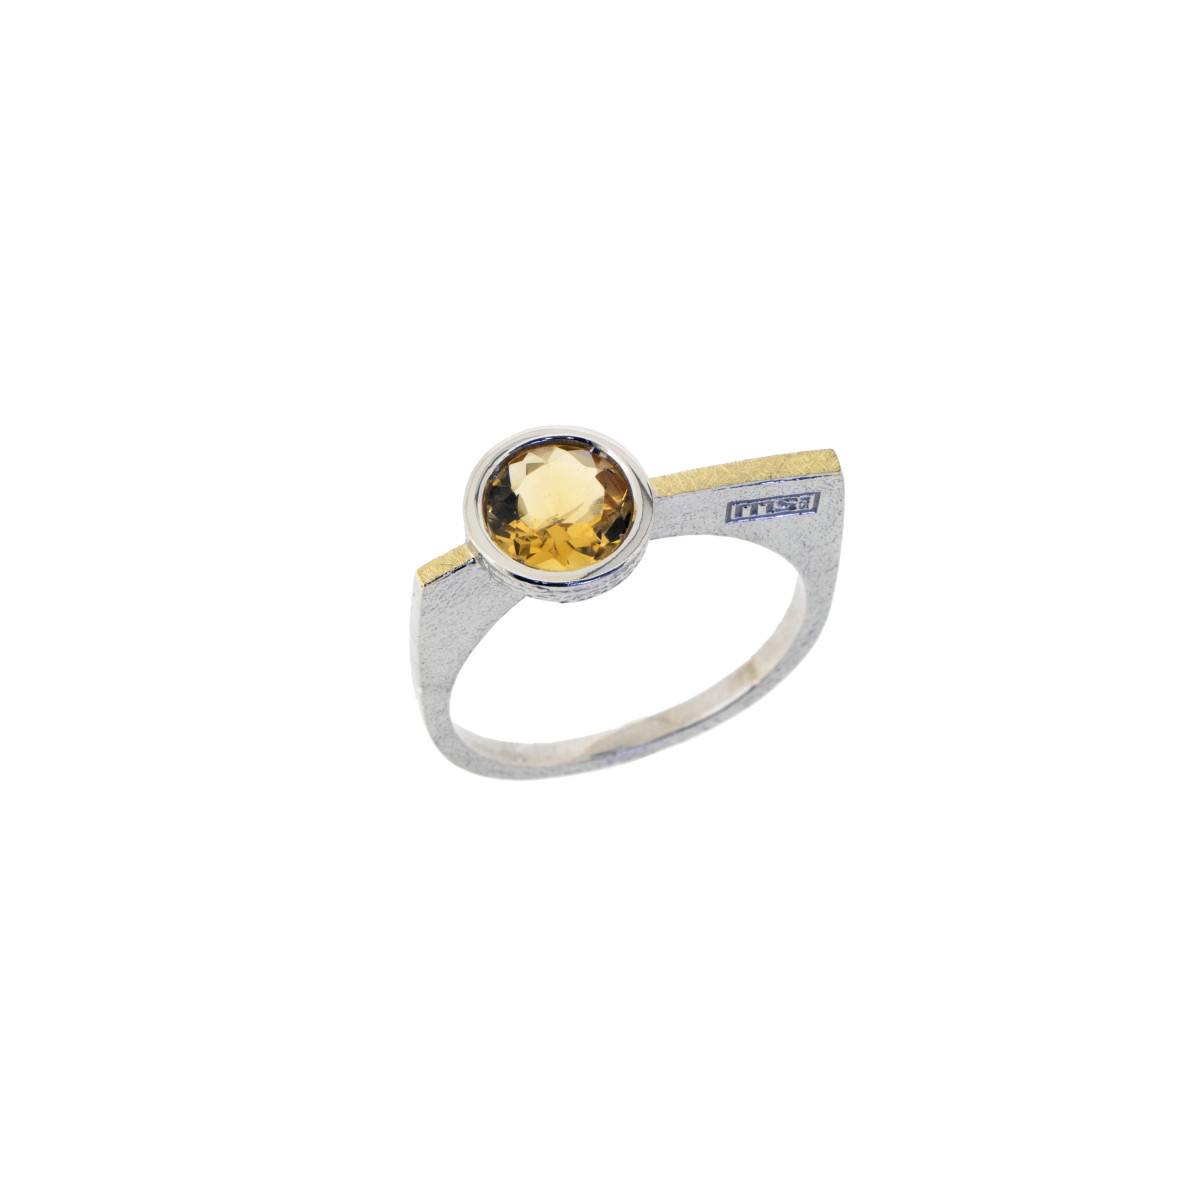 Silver, gold and citrine ring